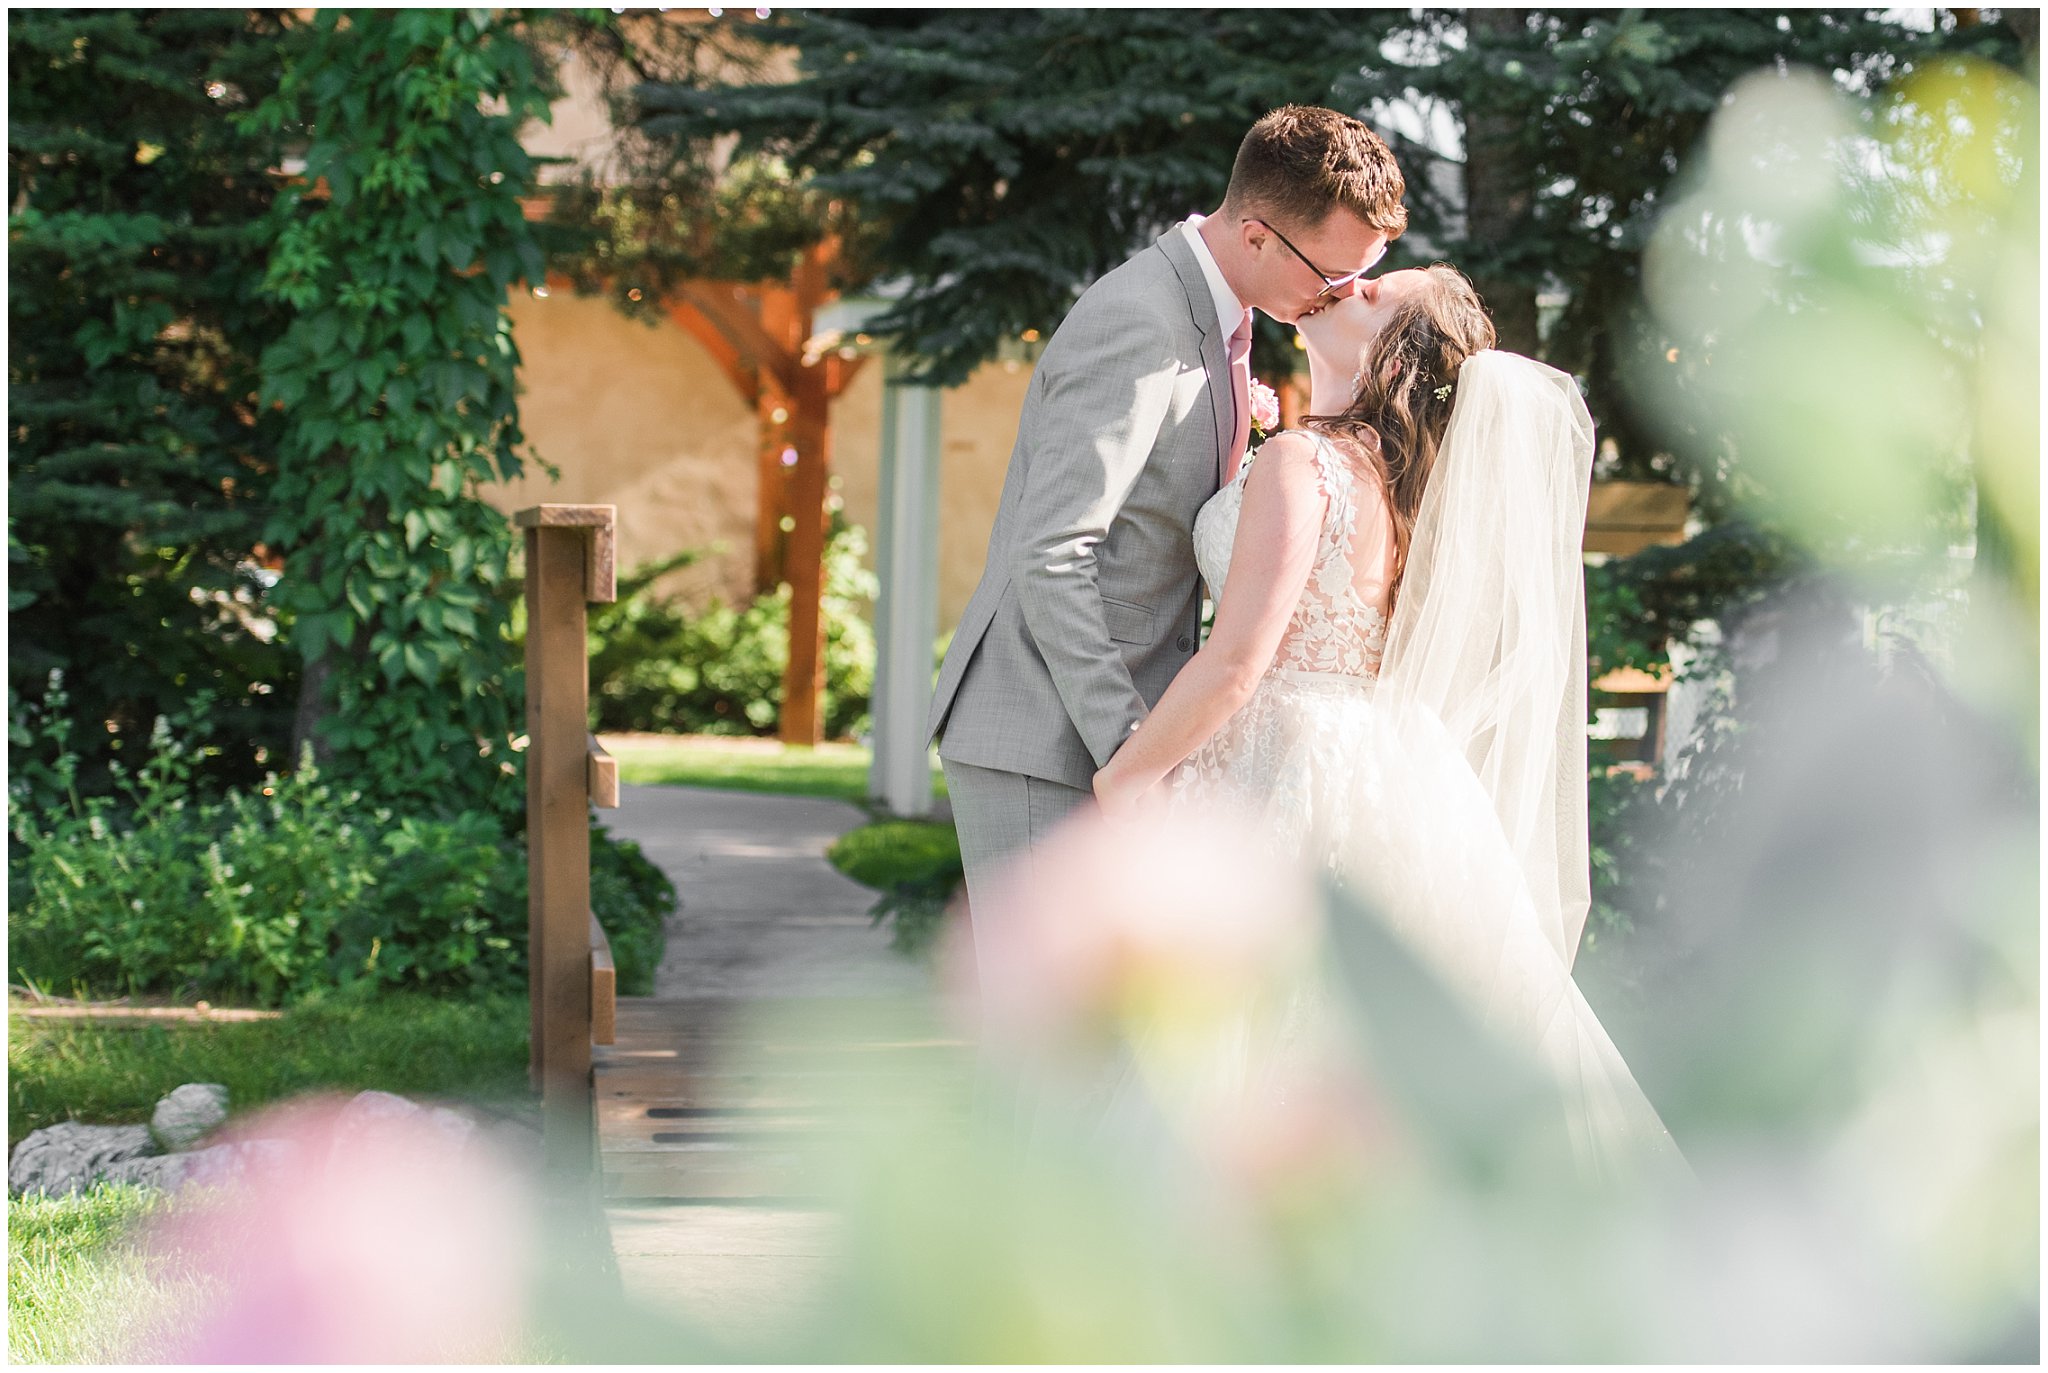 Bride and groom kiss after ceremony | Oak Hills Utah Dusty Rose and Gray Summer Wedding | Jessie and Dallin Photography